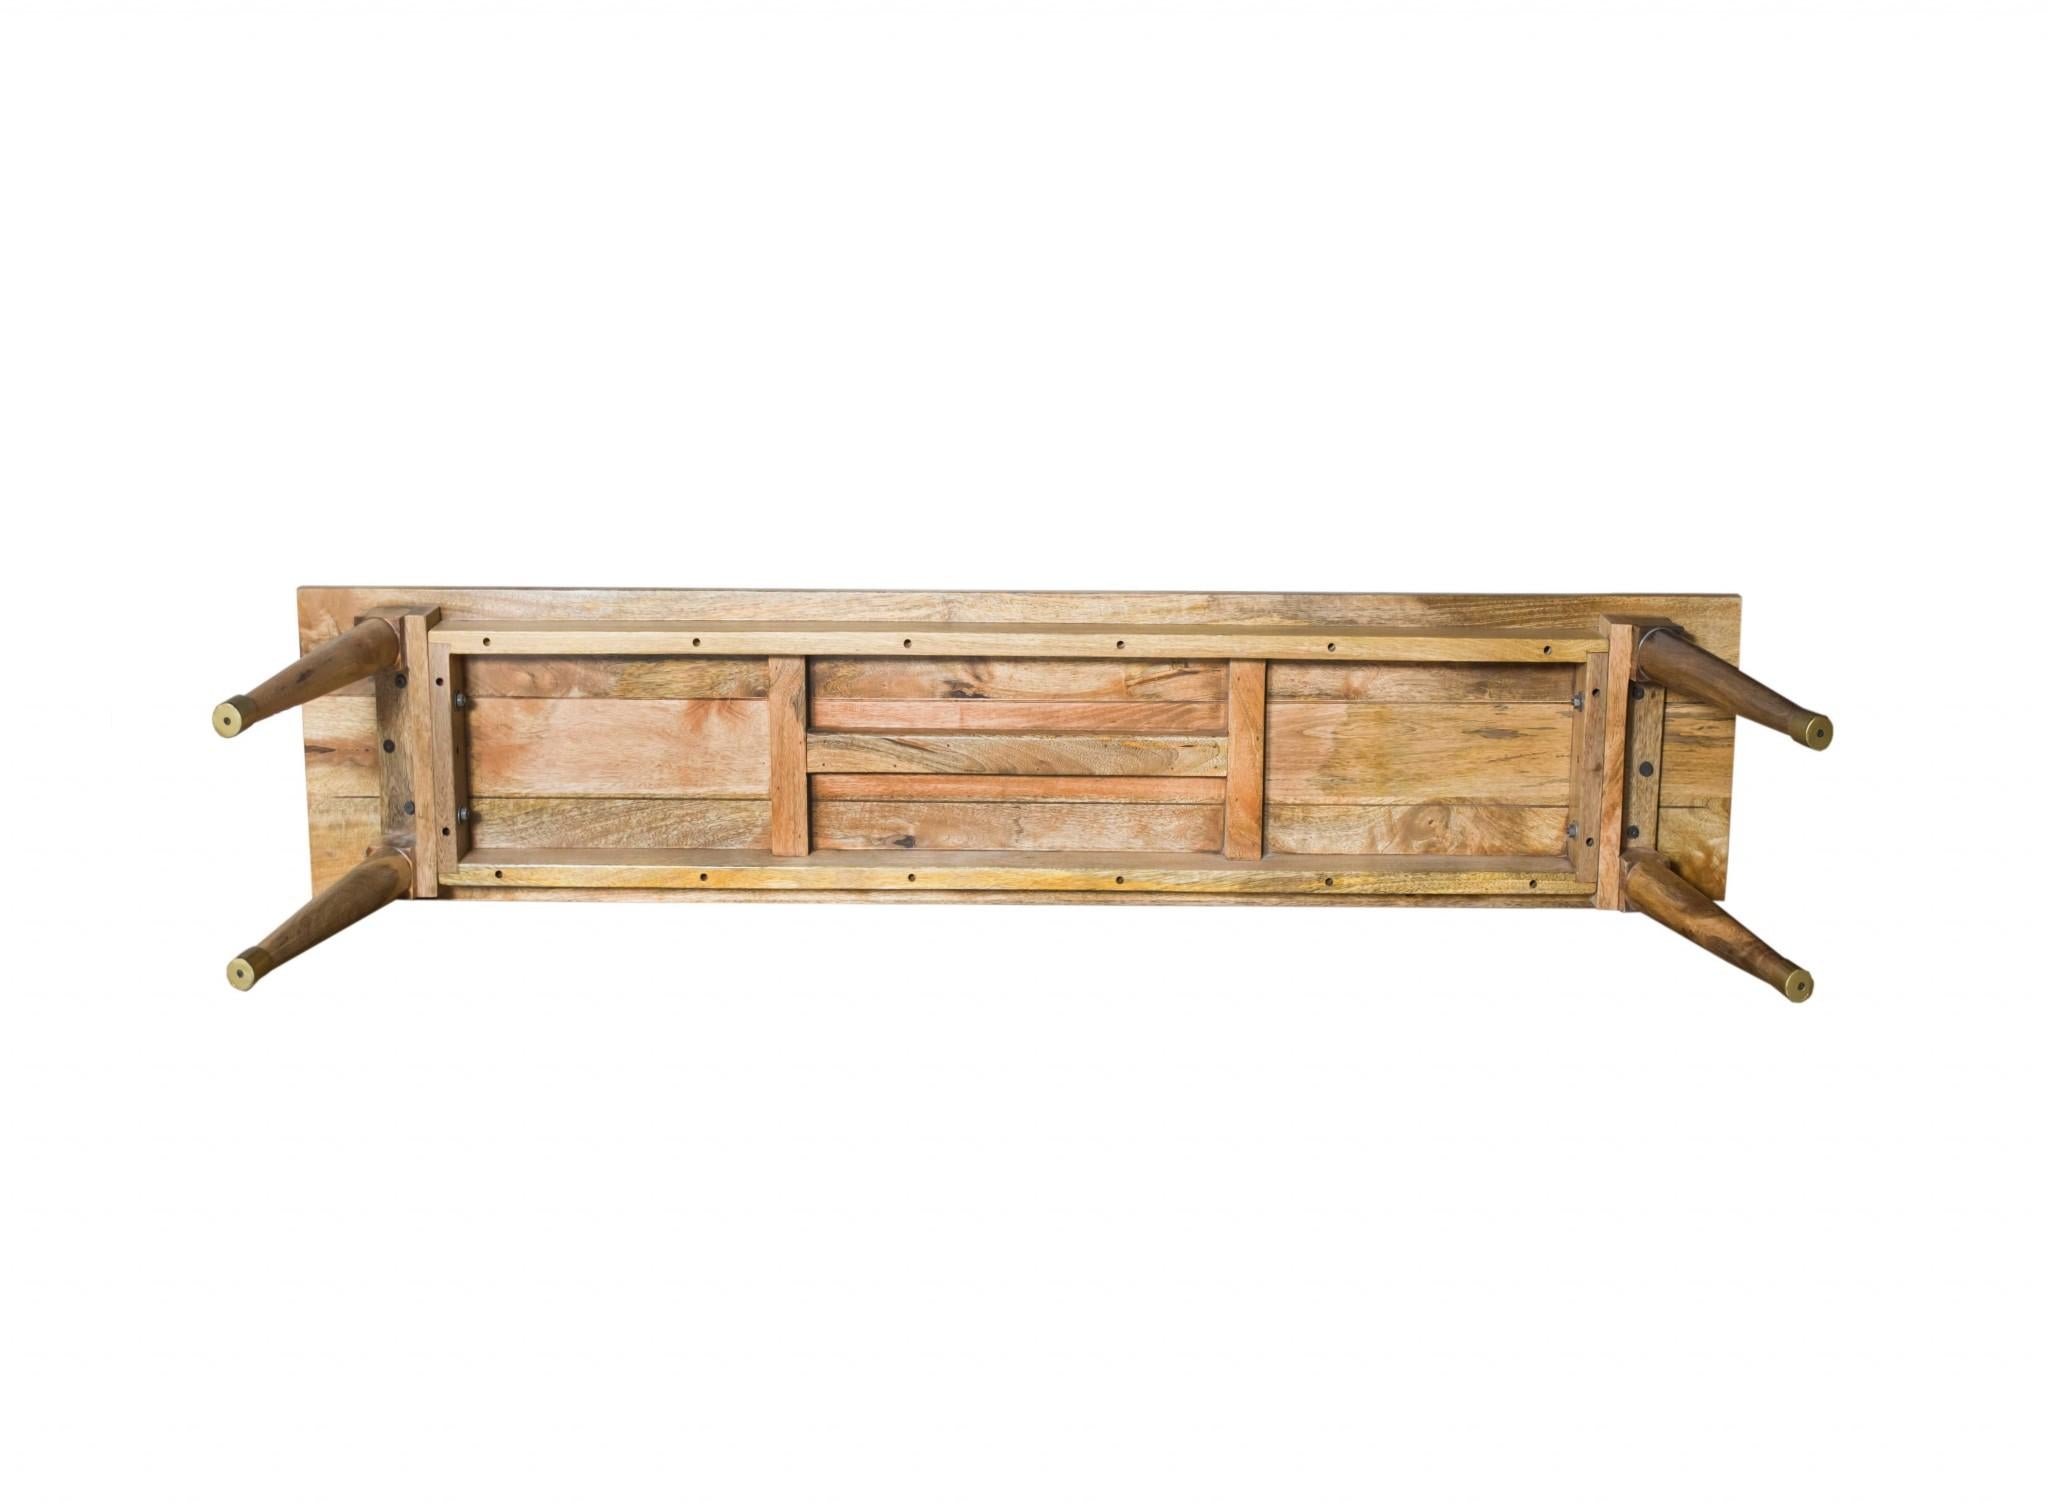 Natural Honey Solid Wood Small Dining Bench